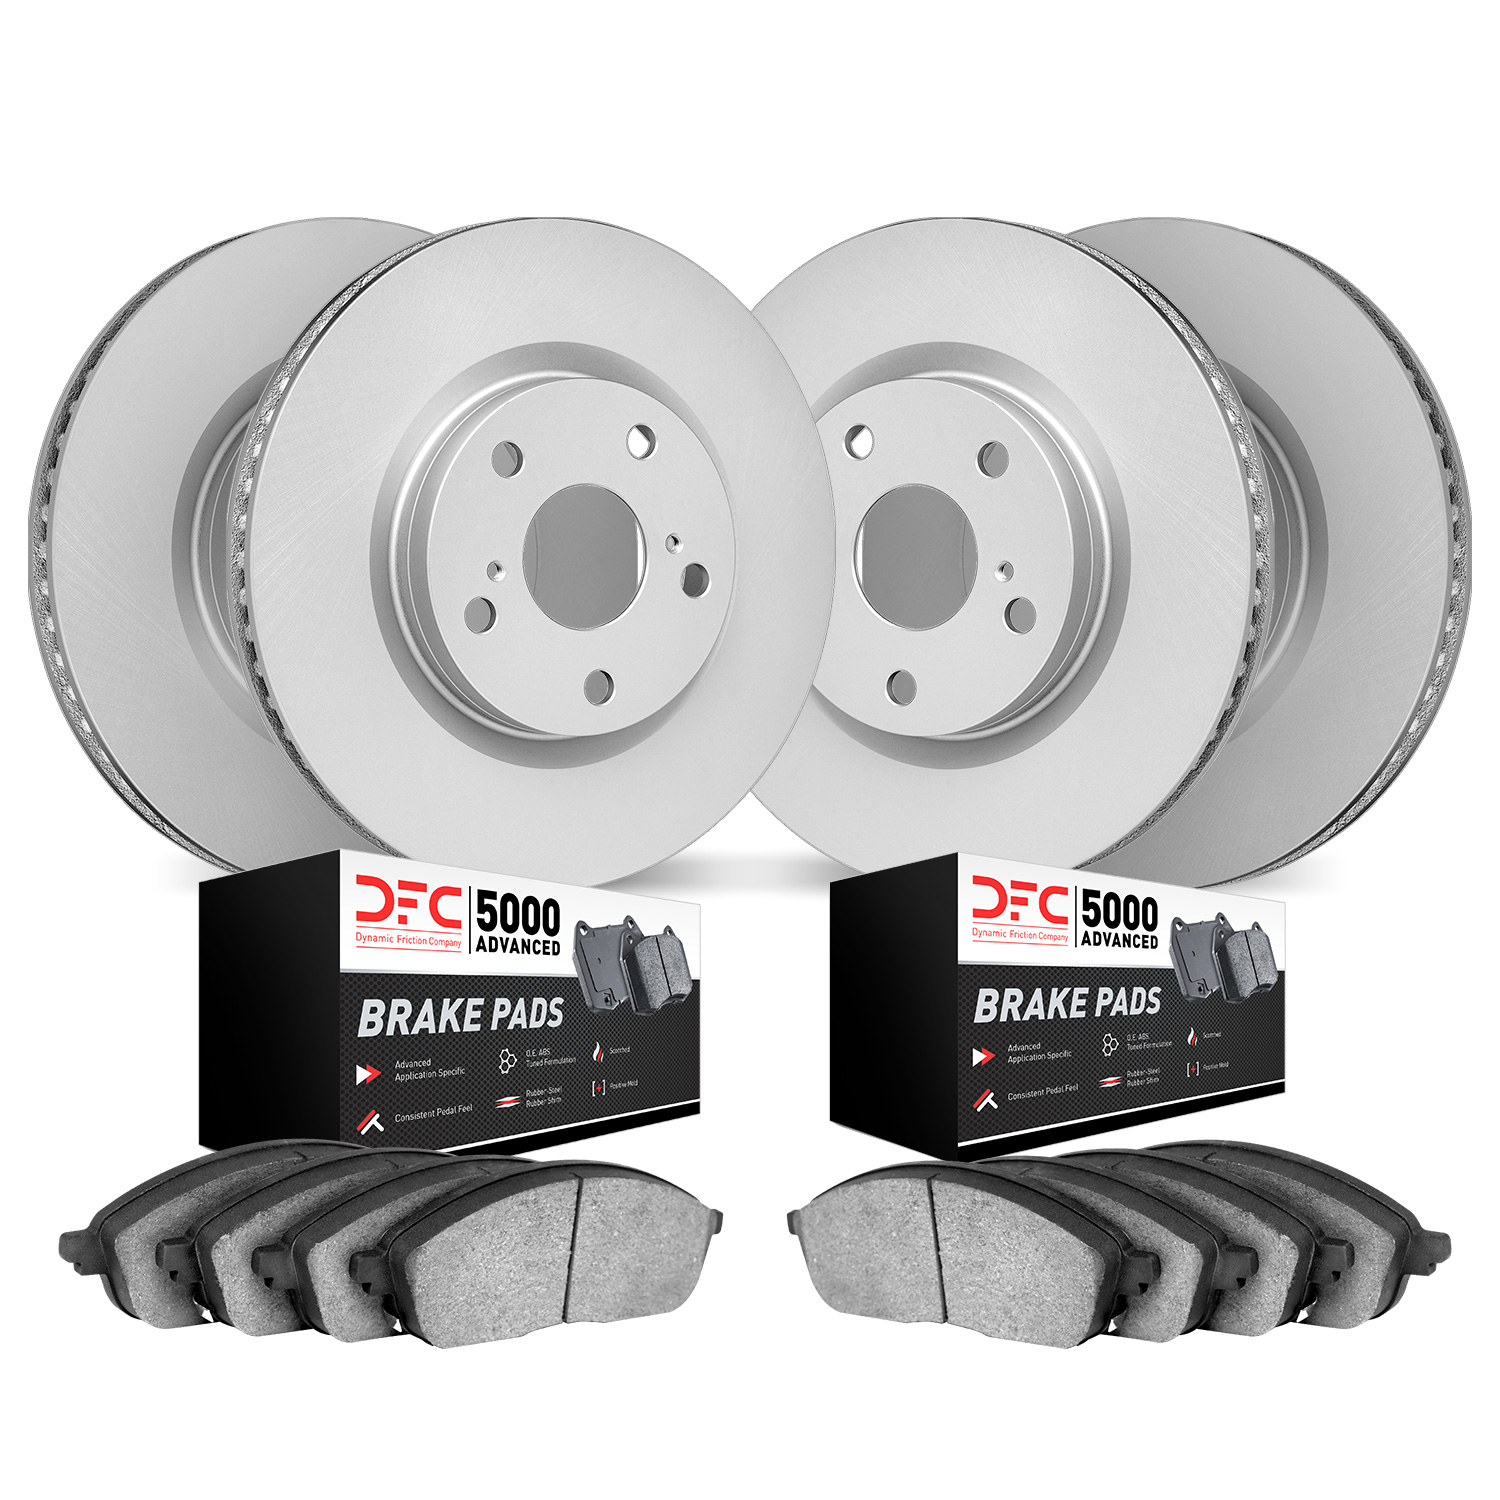 4504-54086 Geospec Brake Rotors w/5000 Advanced Brake Pads Kit, 2013-2019 Ford/Lincoln/Mercury/Mazda, Position: Front and Rear